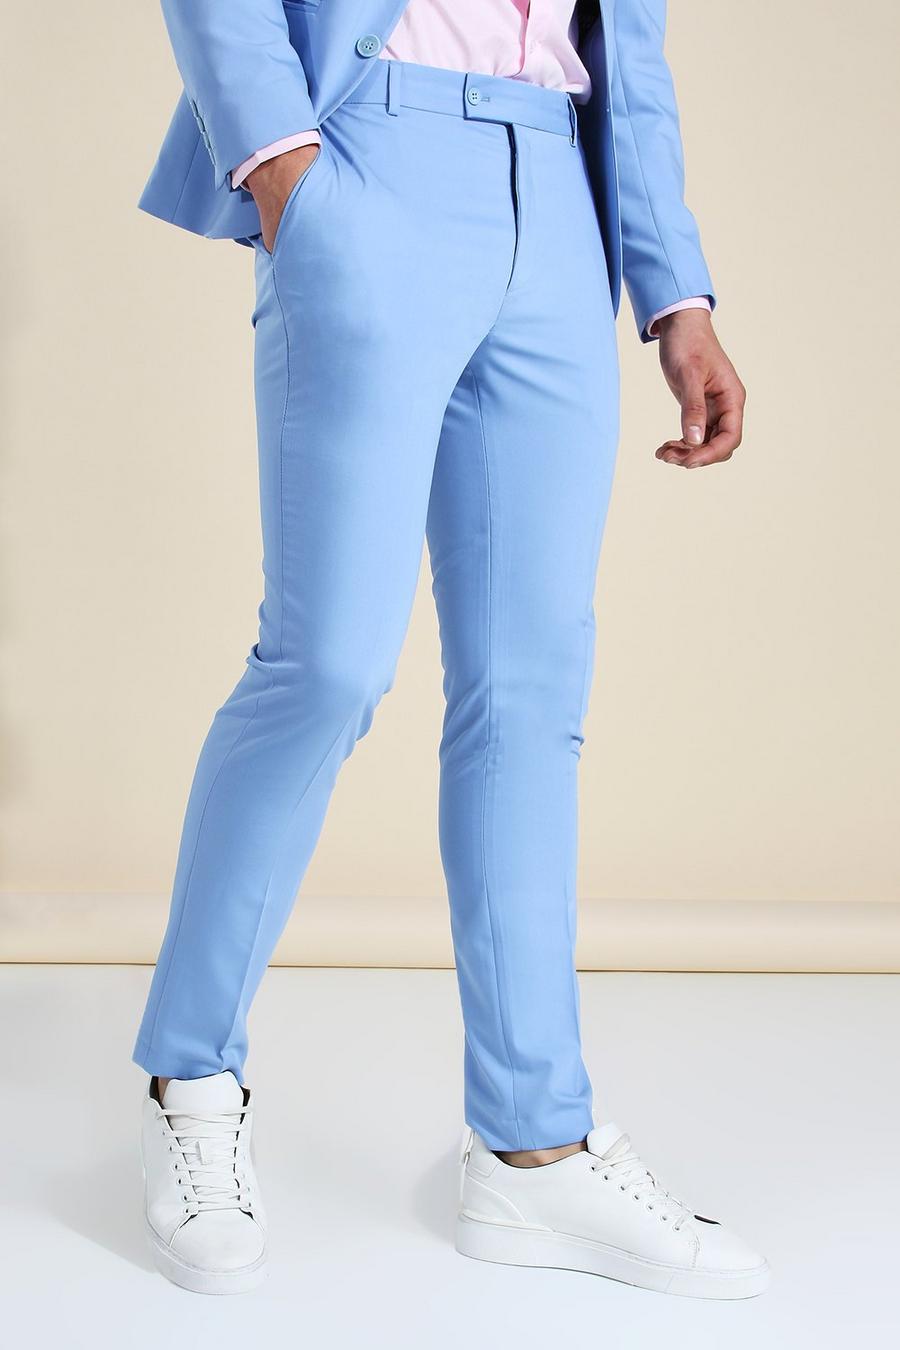 Can I wear a light blue dress shirt with blue pants? This is for